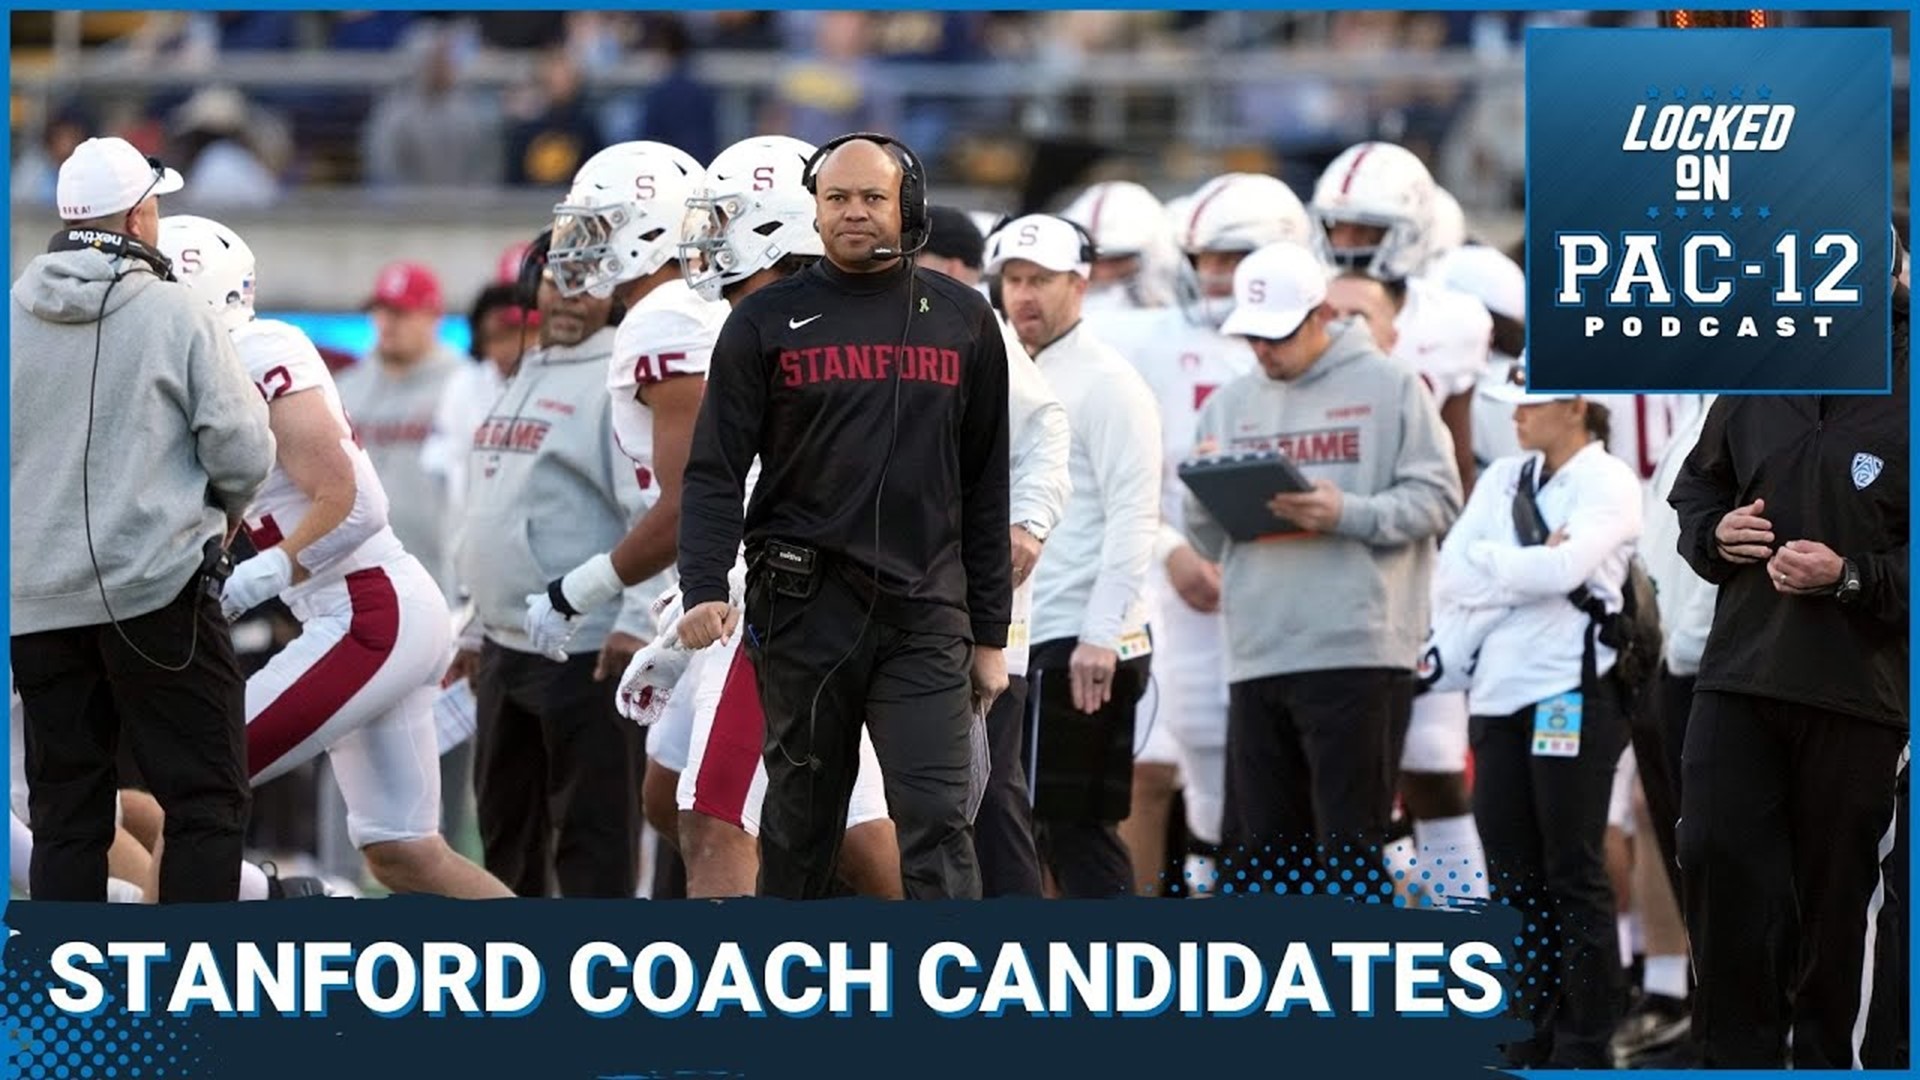 Coaching candidates for Stanford to replace David Shaw as its next football  coach l Locked on Pac-12 